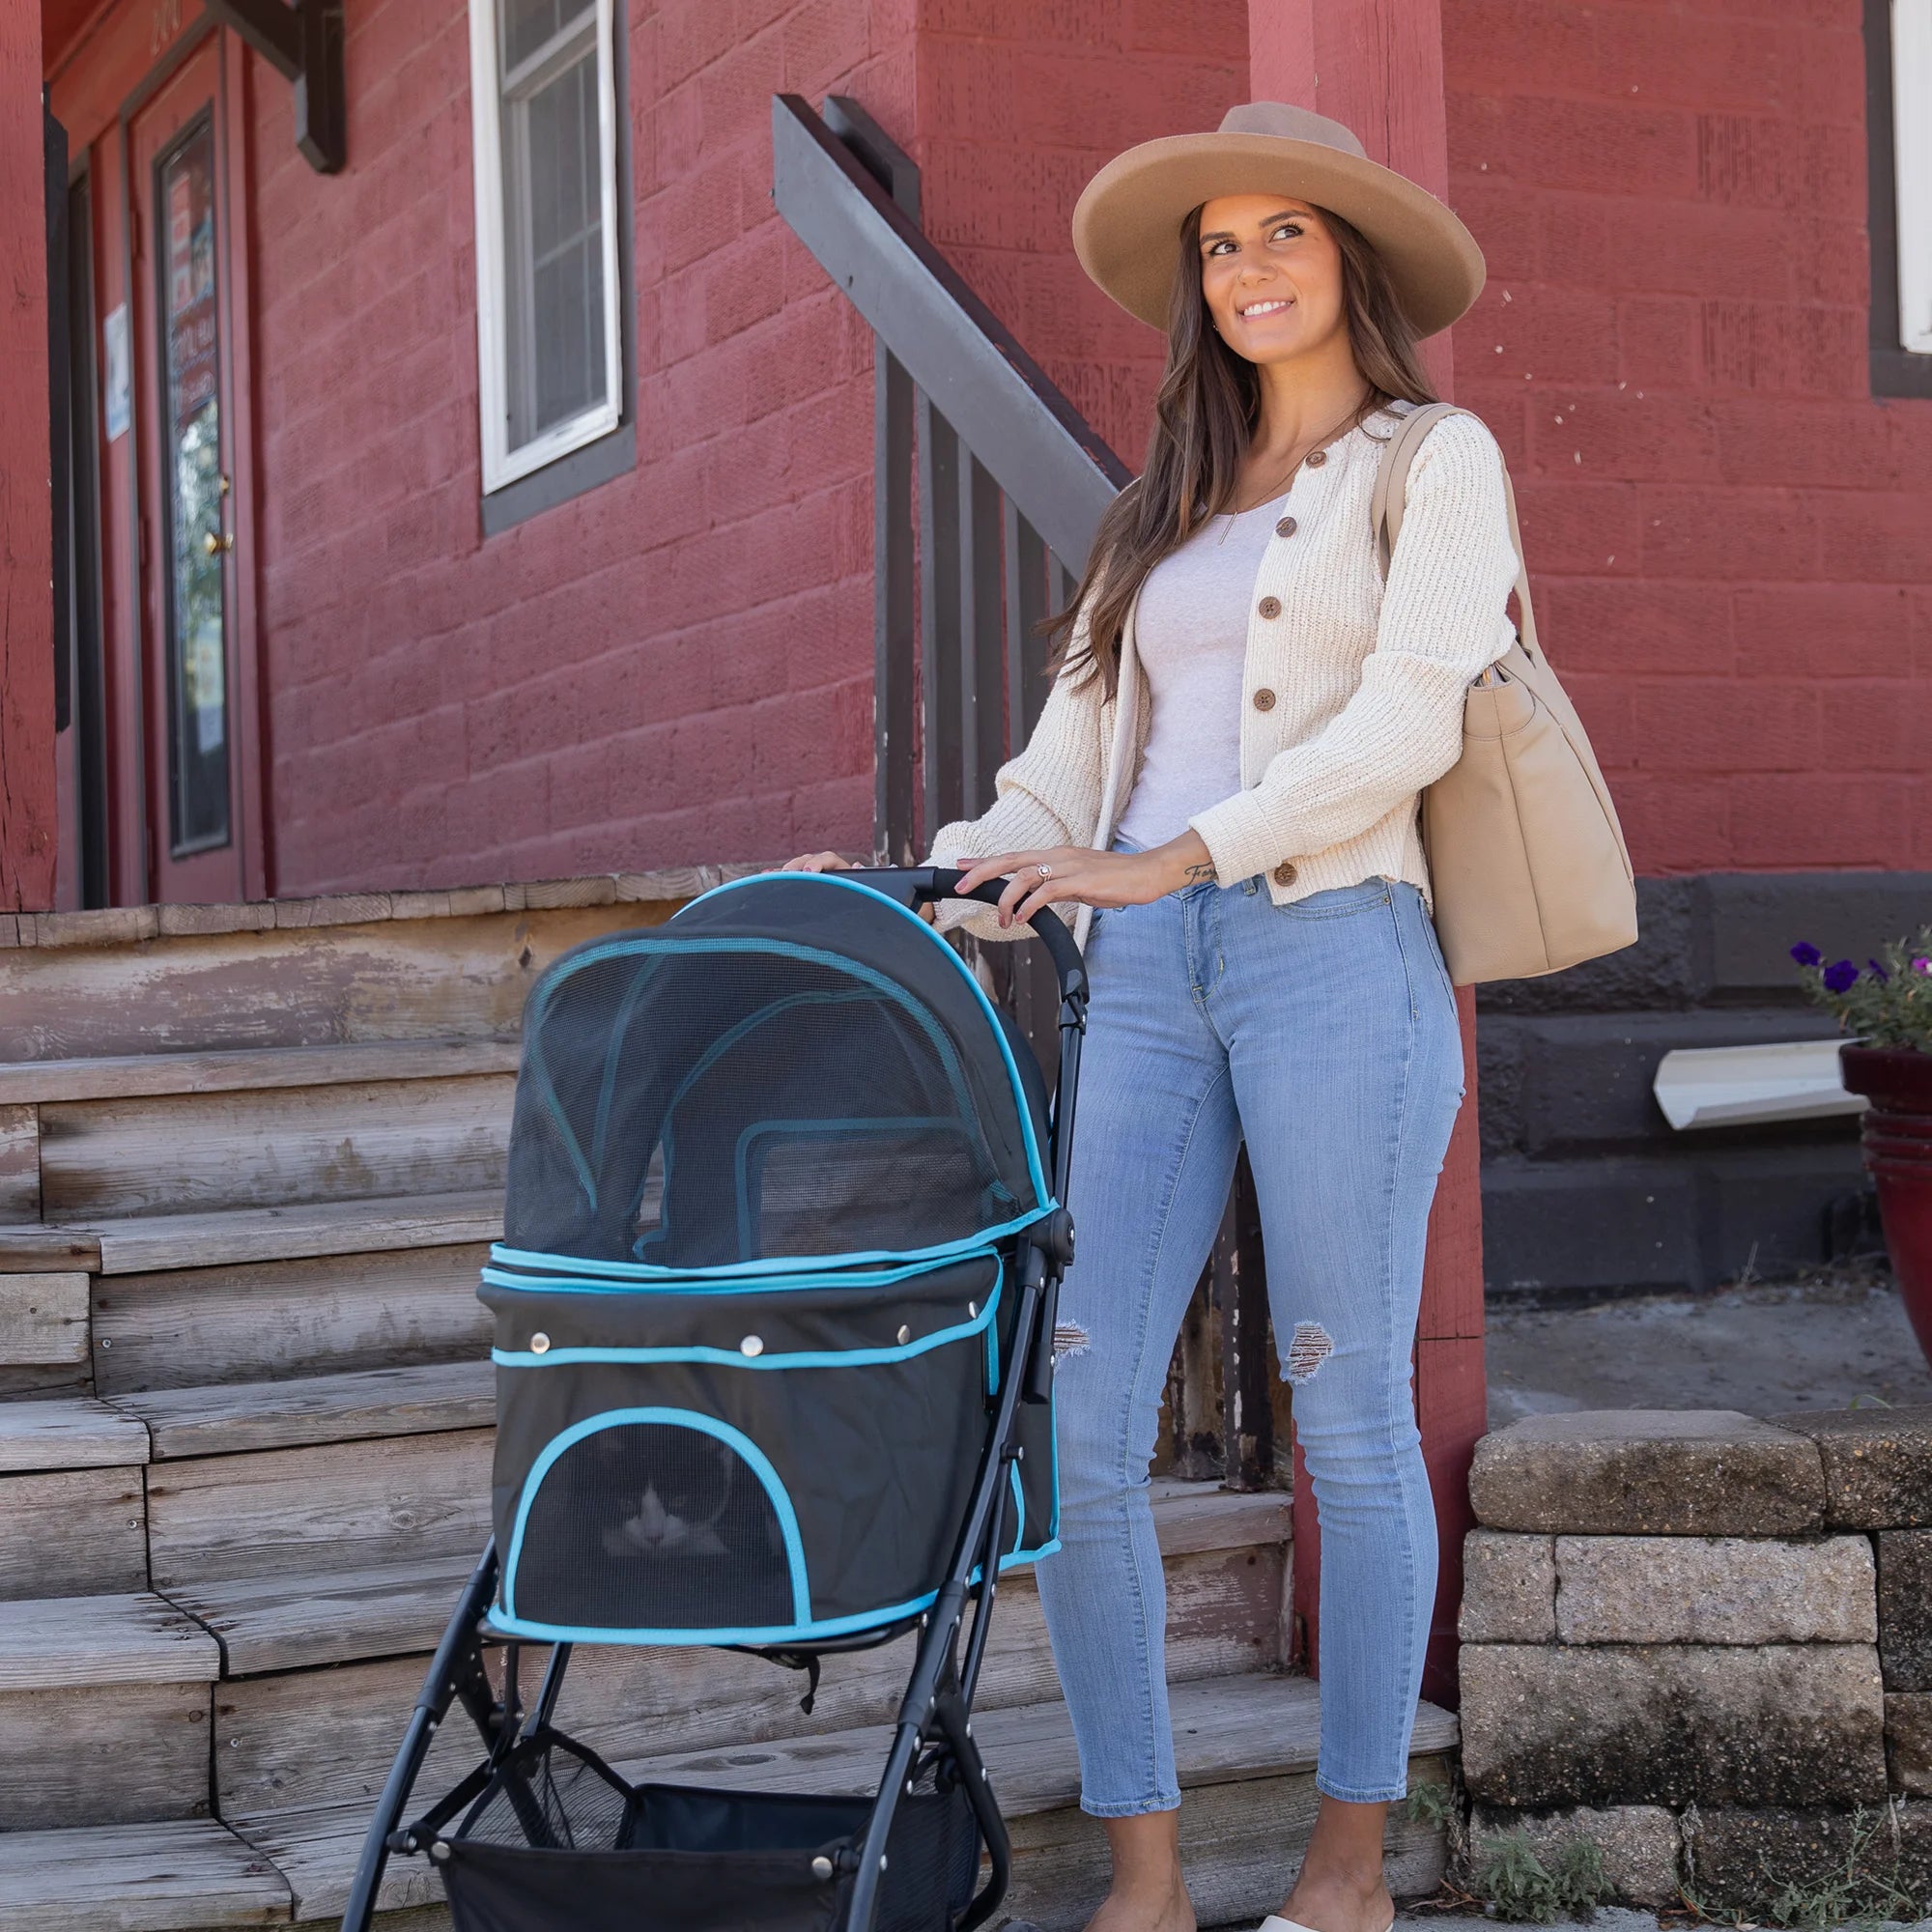 Woman with long brown hair posing with her Easy Fold & Go Pet Stroller in front of a red building with wooden stairs.